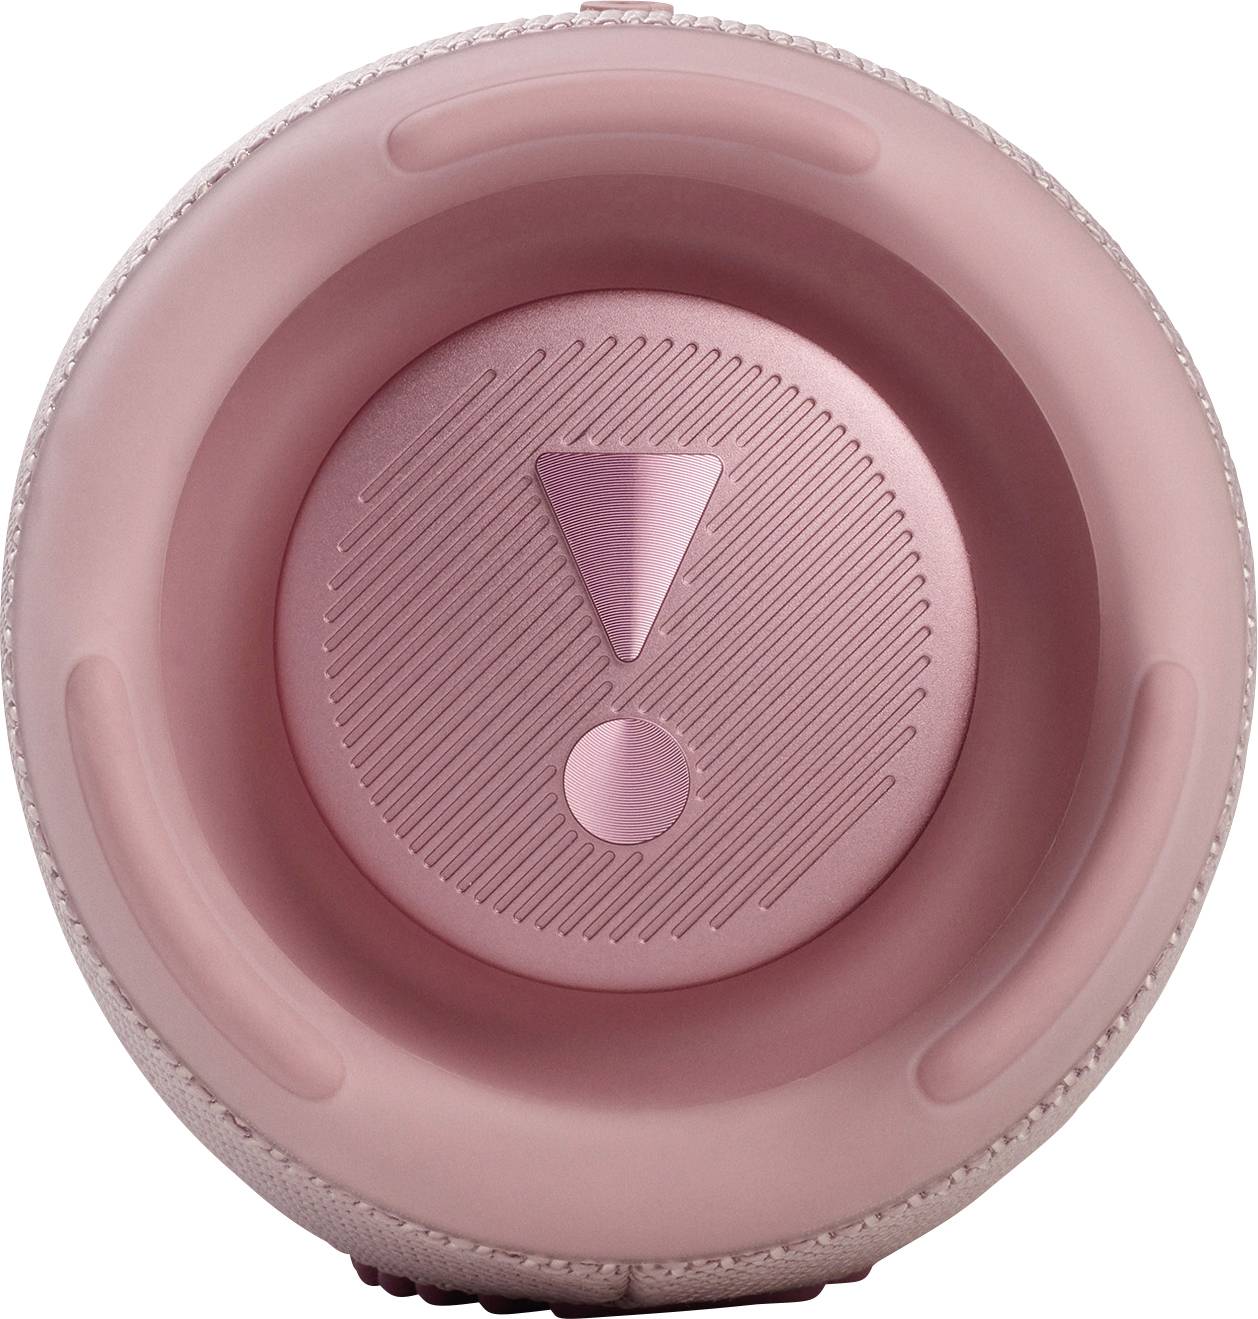 JBL CHARGE 5 Bluetooth speaker Outdoor, Water-proof, USB Pink